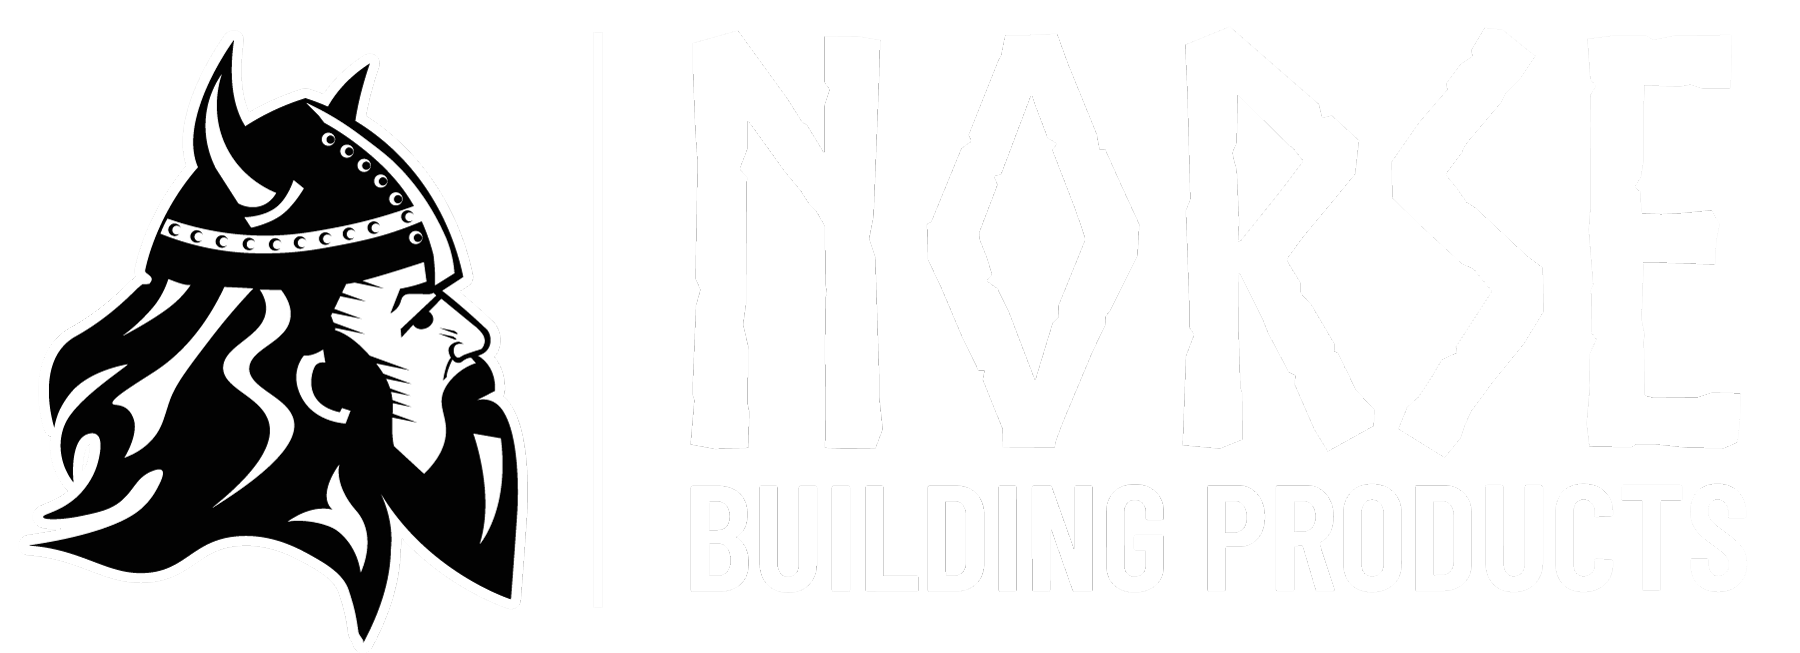 Norse Building Products